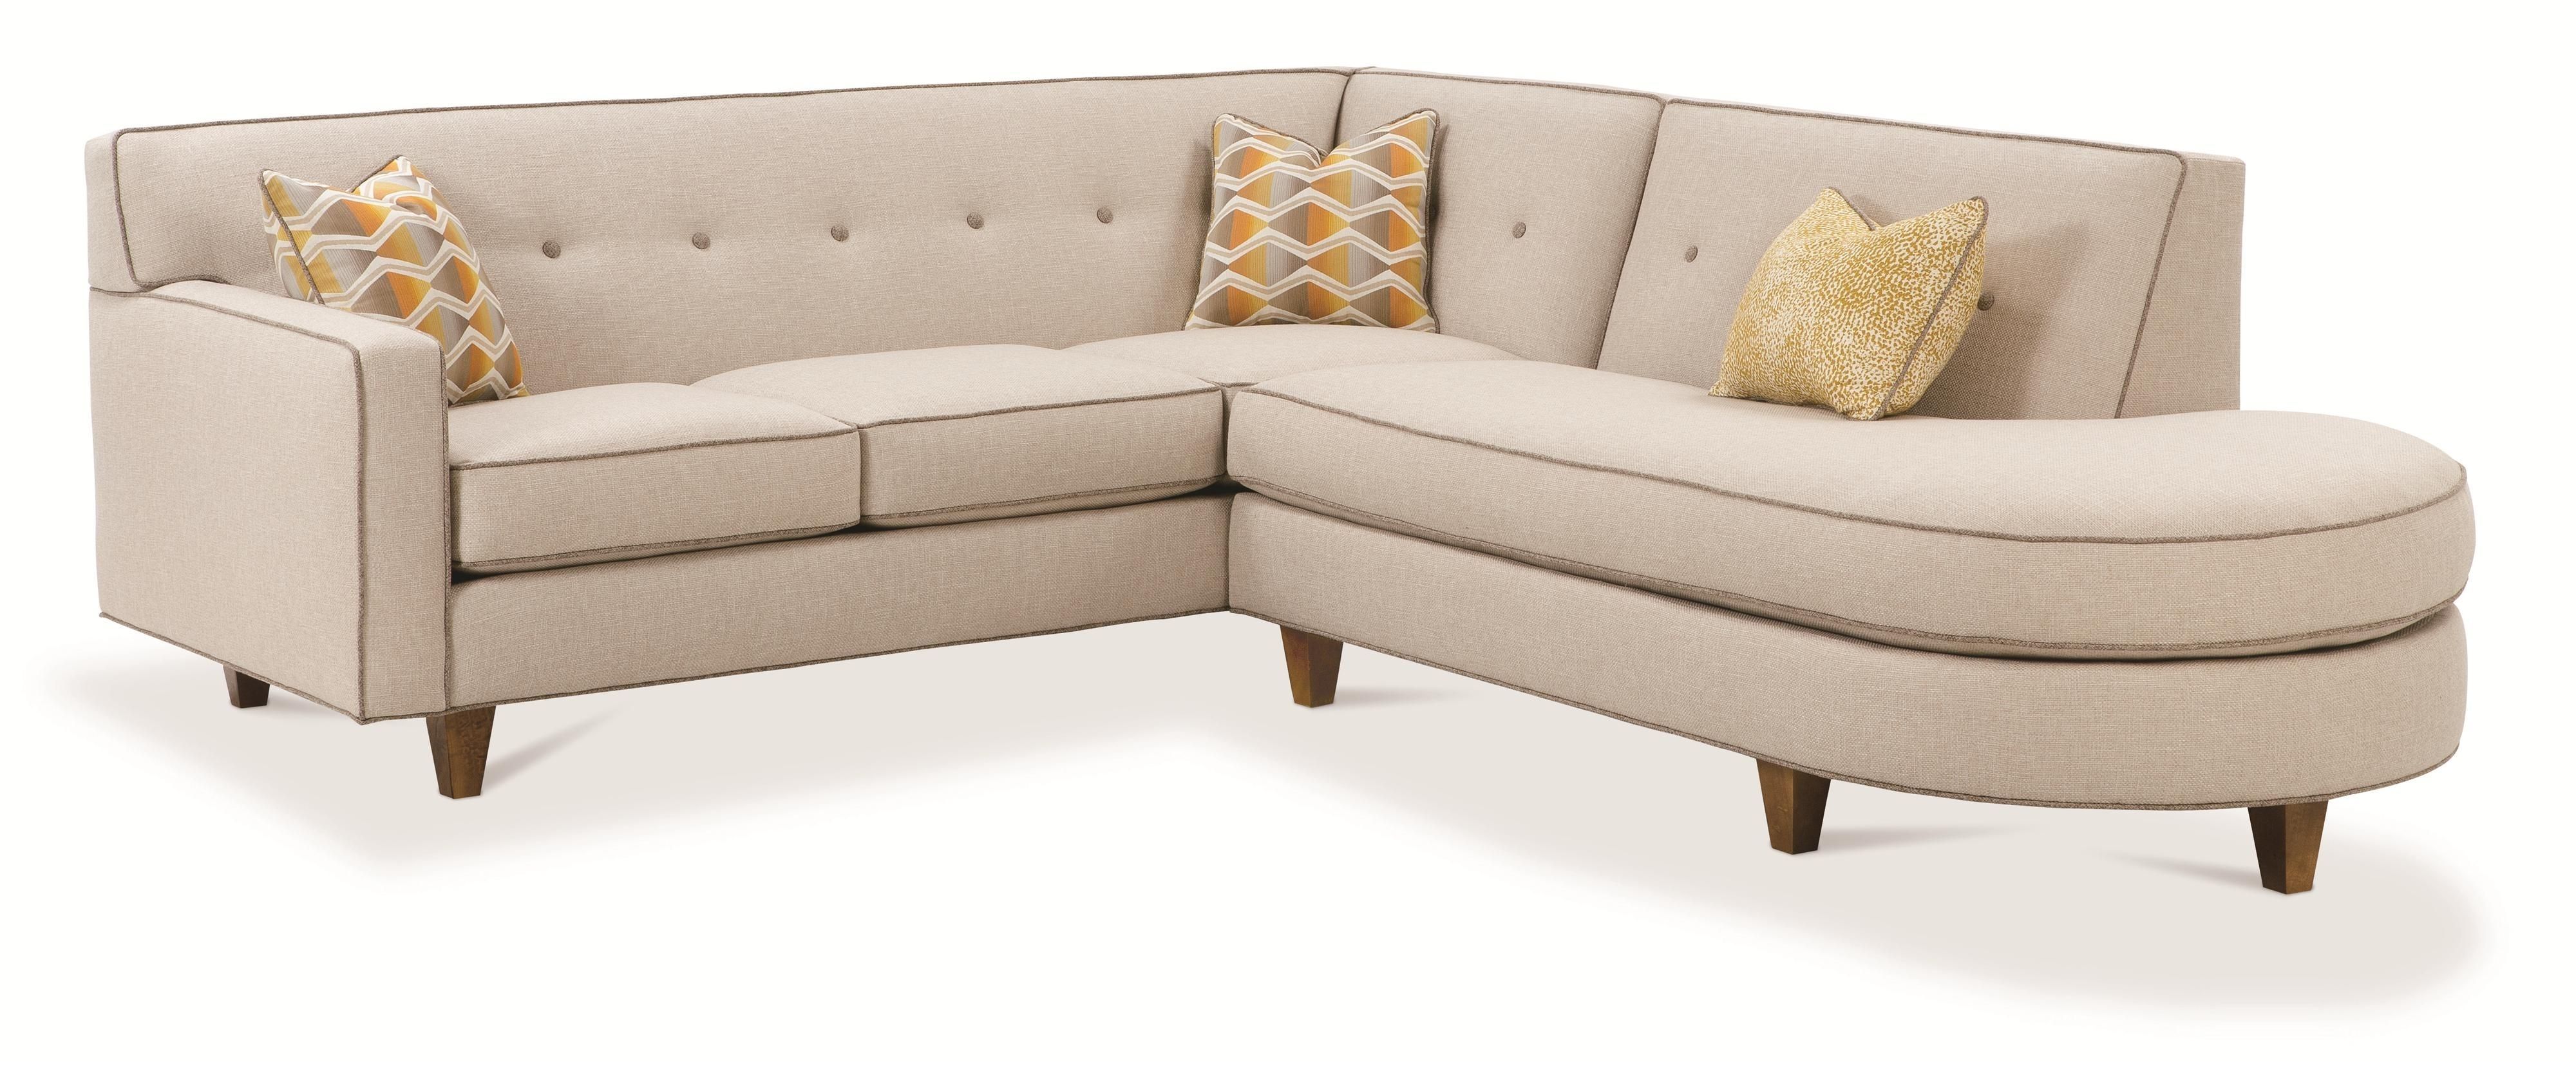 Rowe Dorset Contemporary 2 Piece Sectional Sofa | Baer's Furniture With Regard To Naples Fl Sectional Sofas (Photo 8 of 10)